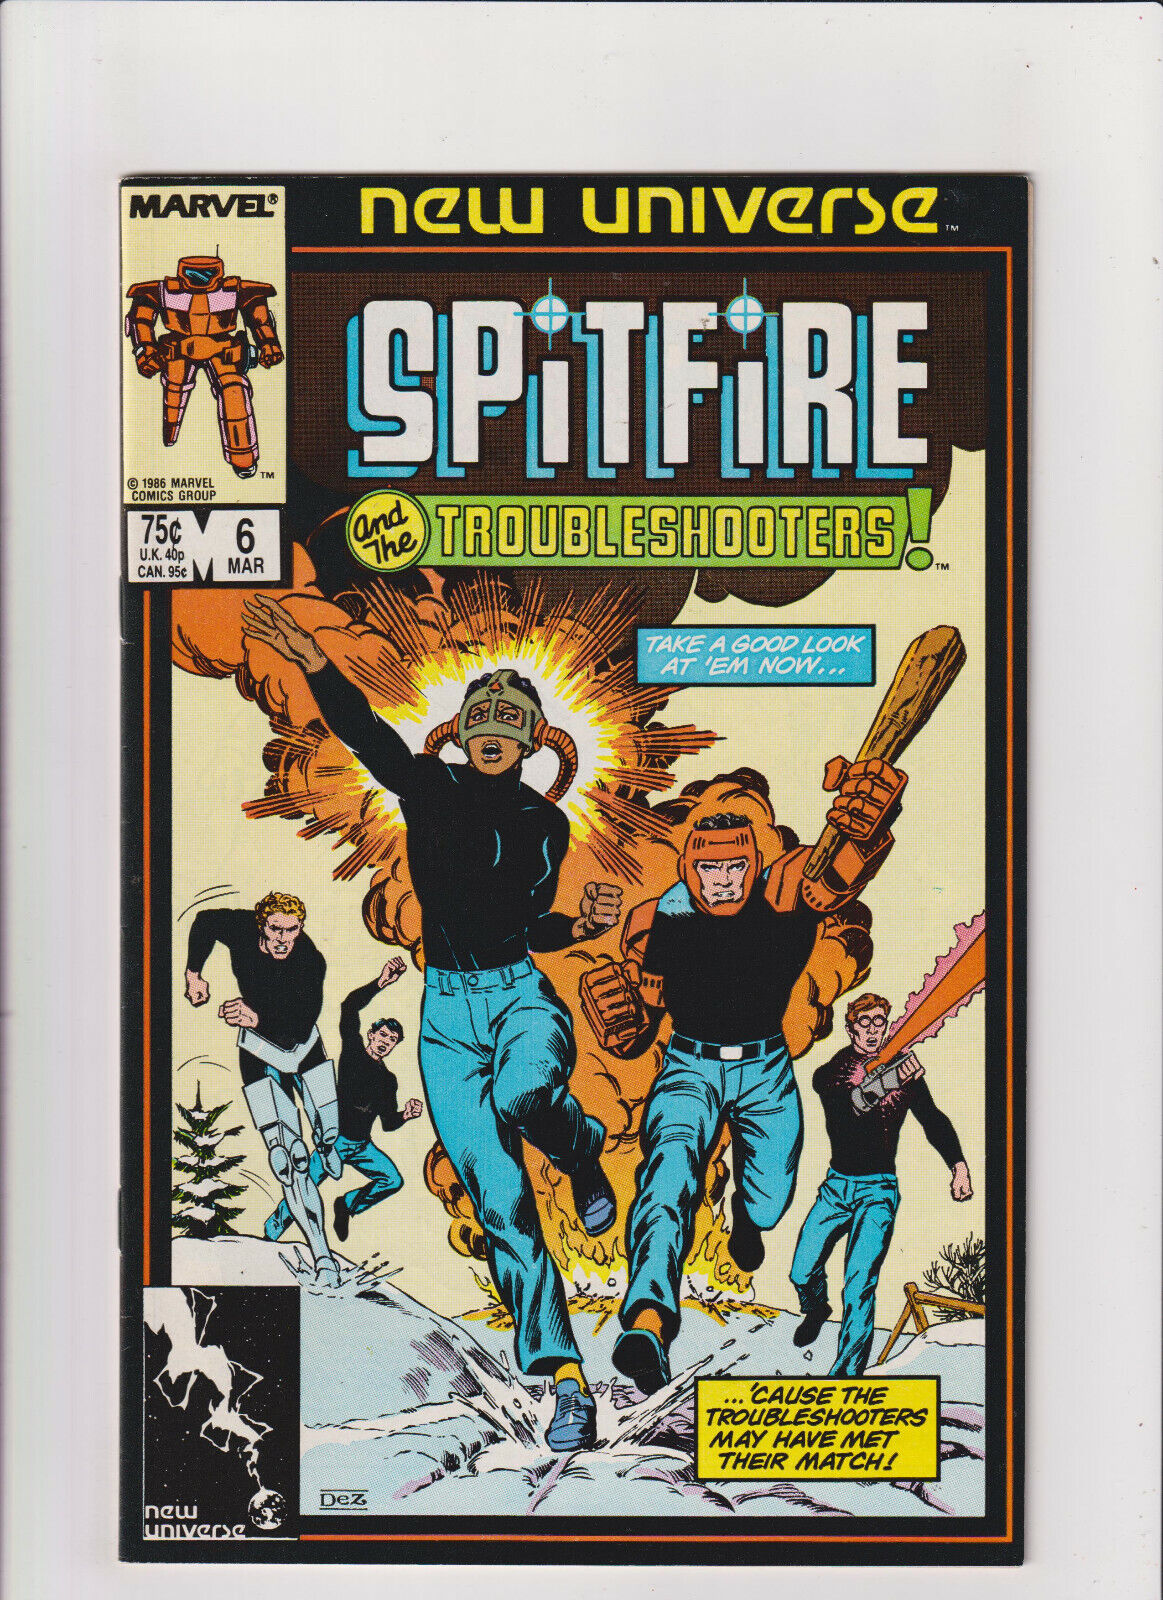 Spitfire and the Troubleshooters #6 VF/NM 9.0 Marvel Comics New Universe 1986 